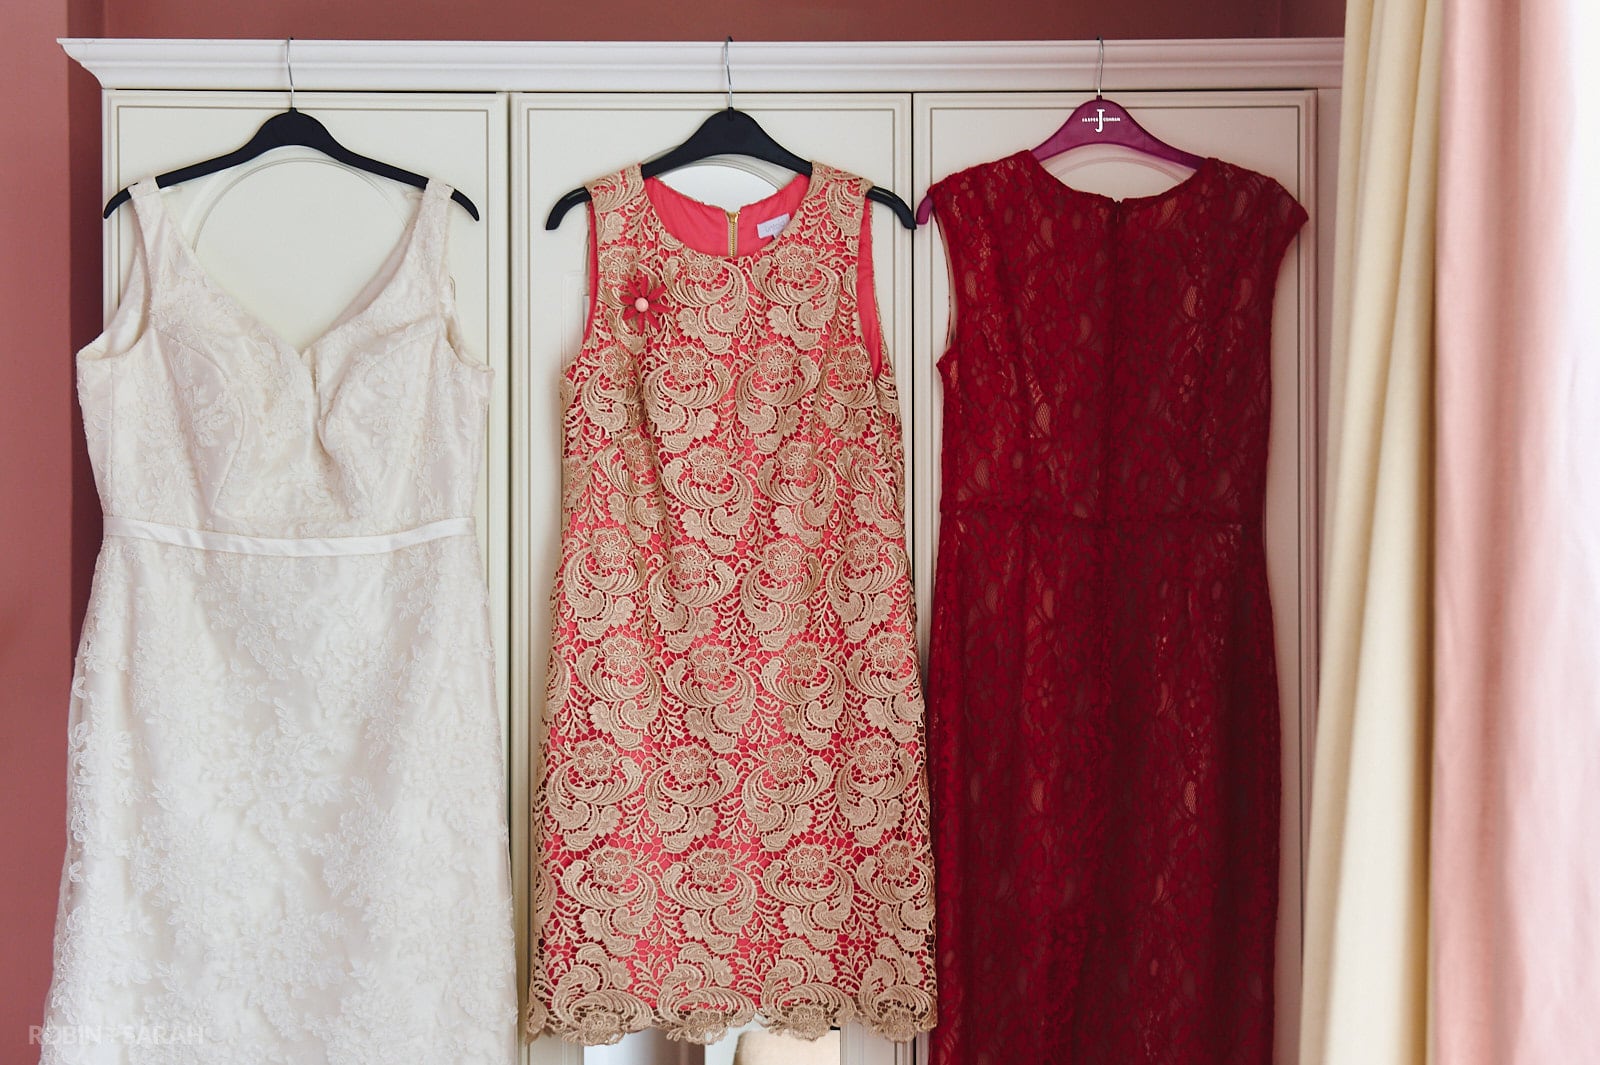 Short white wedding dress and two red bridesmaids dresses hang up on wardrobe